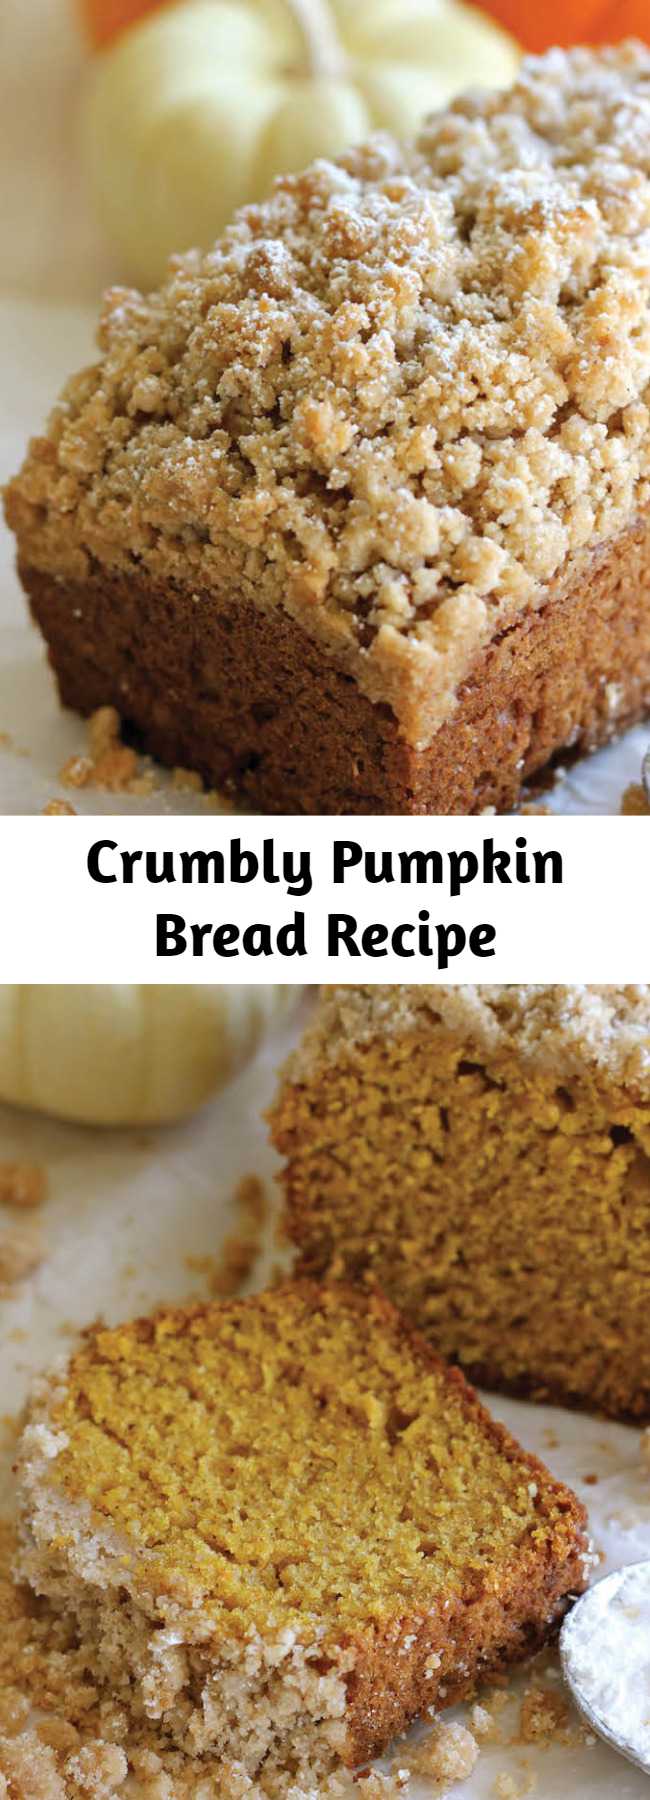 Crumbly Pumpkin Bread Recipe - With lightened-up options, this can be eaten guilt-free! And the crumb topping is out of this world amazing!